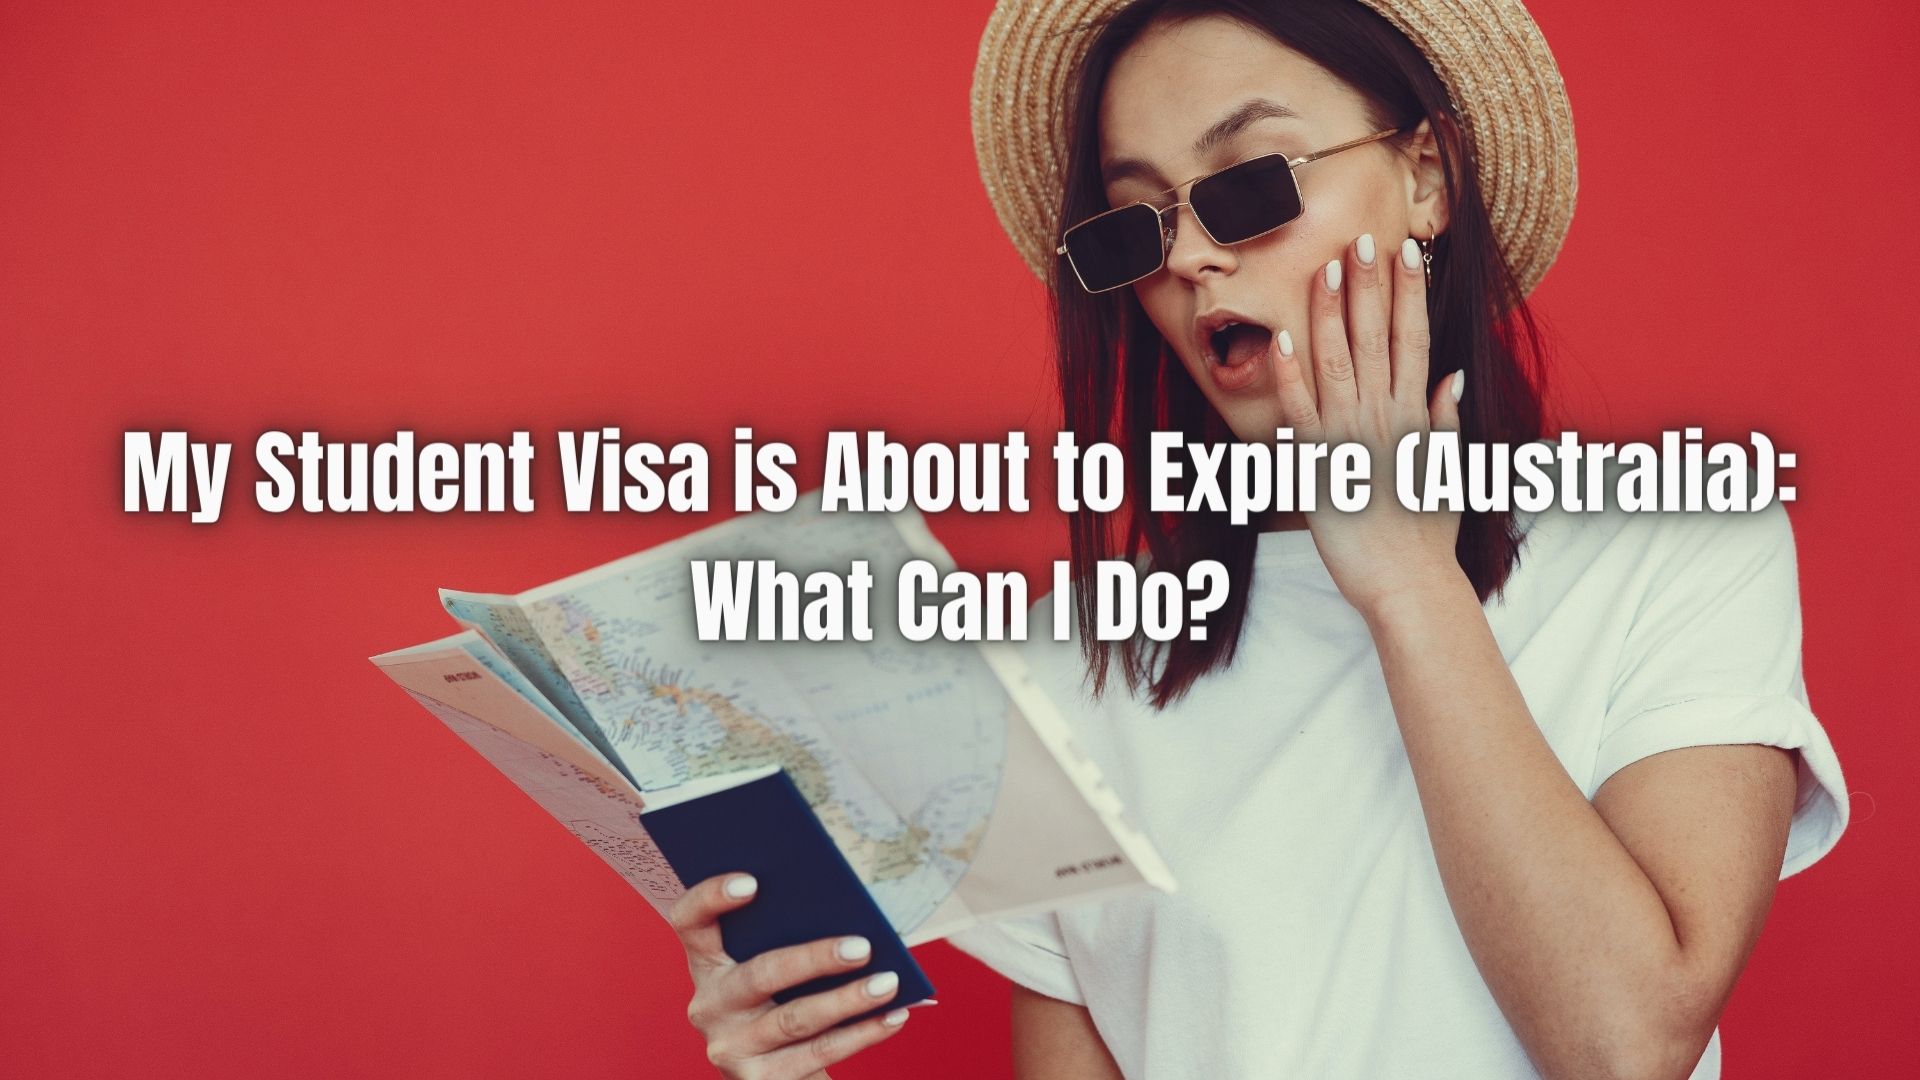 Student Visa Expiring in Australia? A Survival Guide. Understand extension options, next steps, and deadlines to ensure a smooth transition.